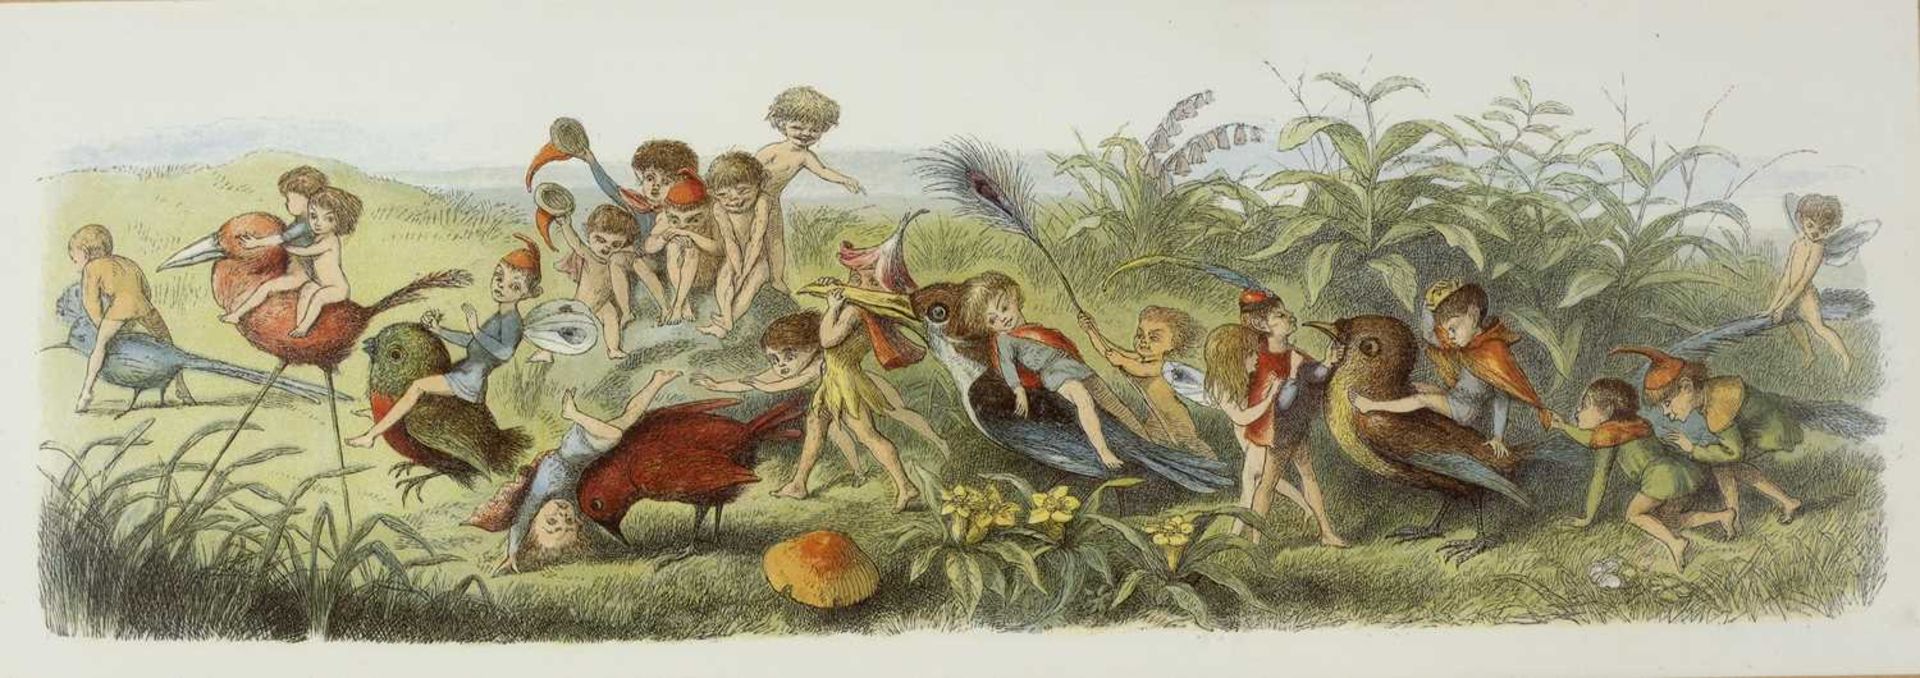 Richard Doyle (1824-1883) 'Wood elves at play', limited edition print, number 102/1500, with - Image 2 of 6